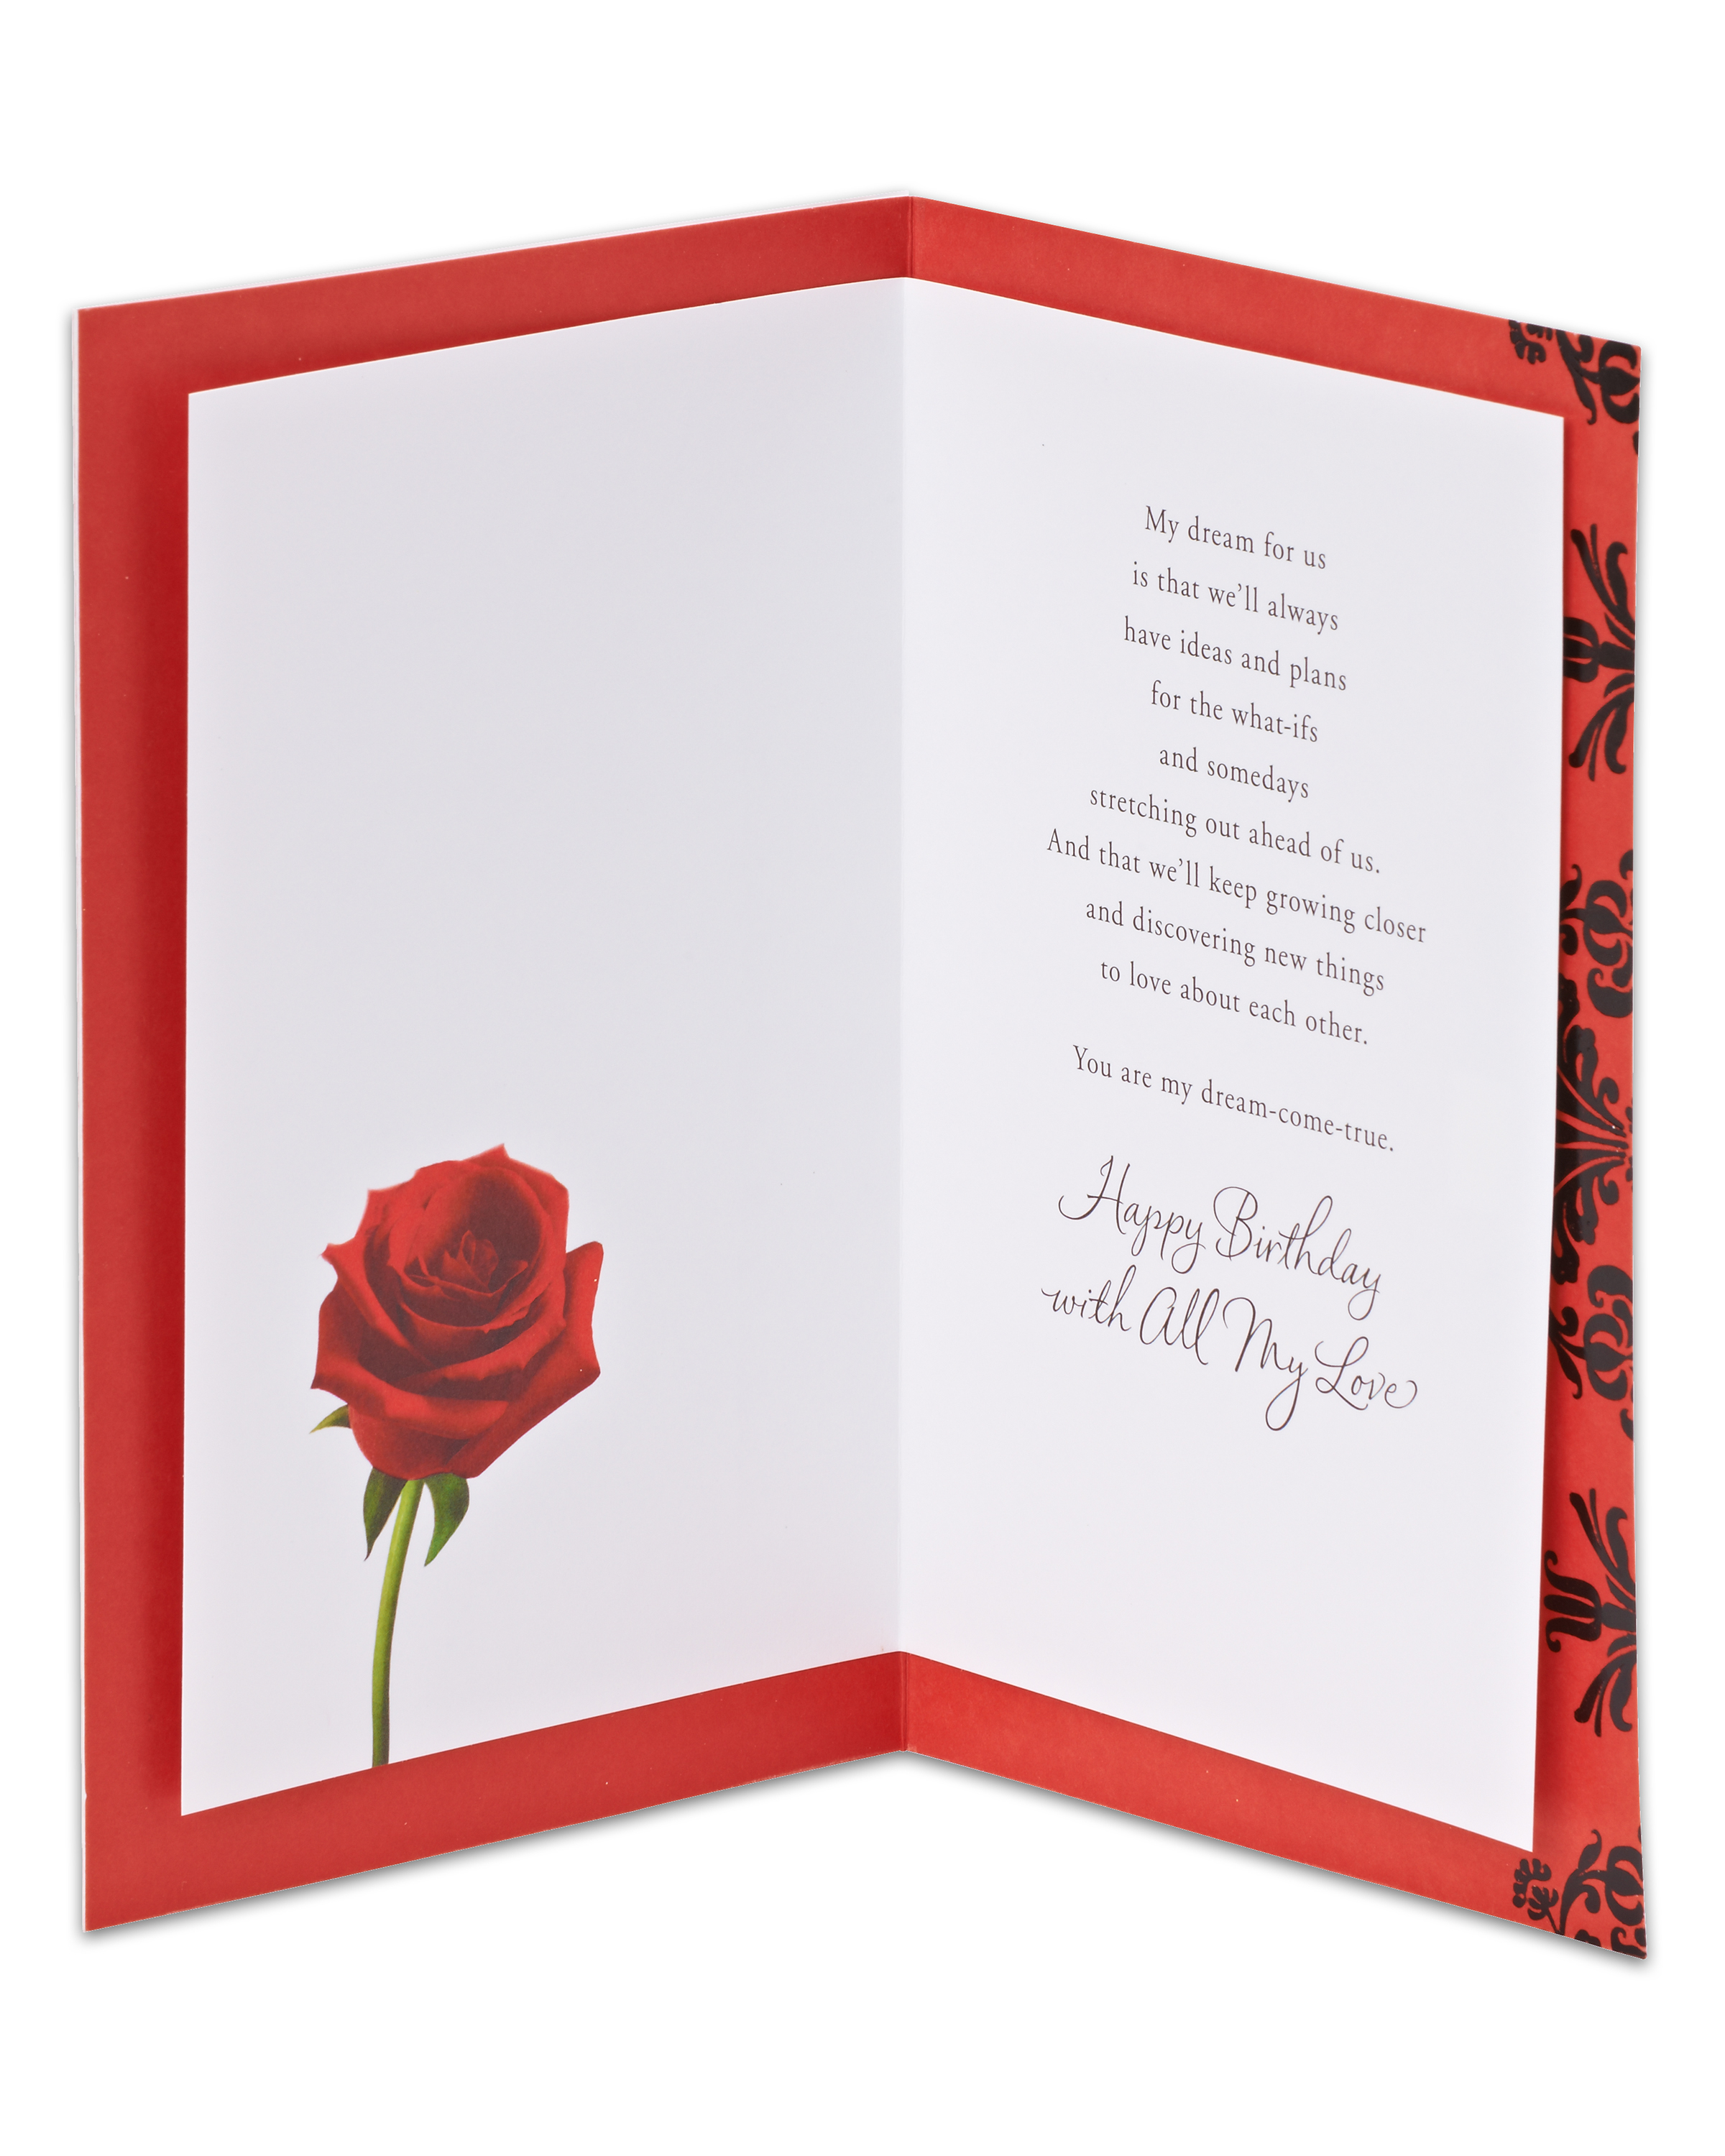 Romantic Birthday Card Ideas American Greetings Love Letter Birthday Card For Sweetheart